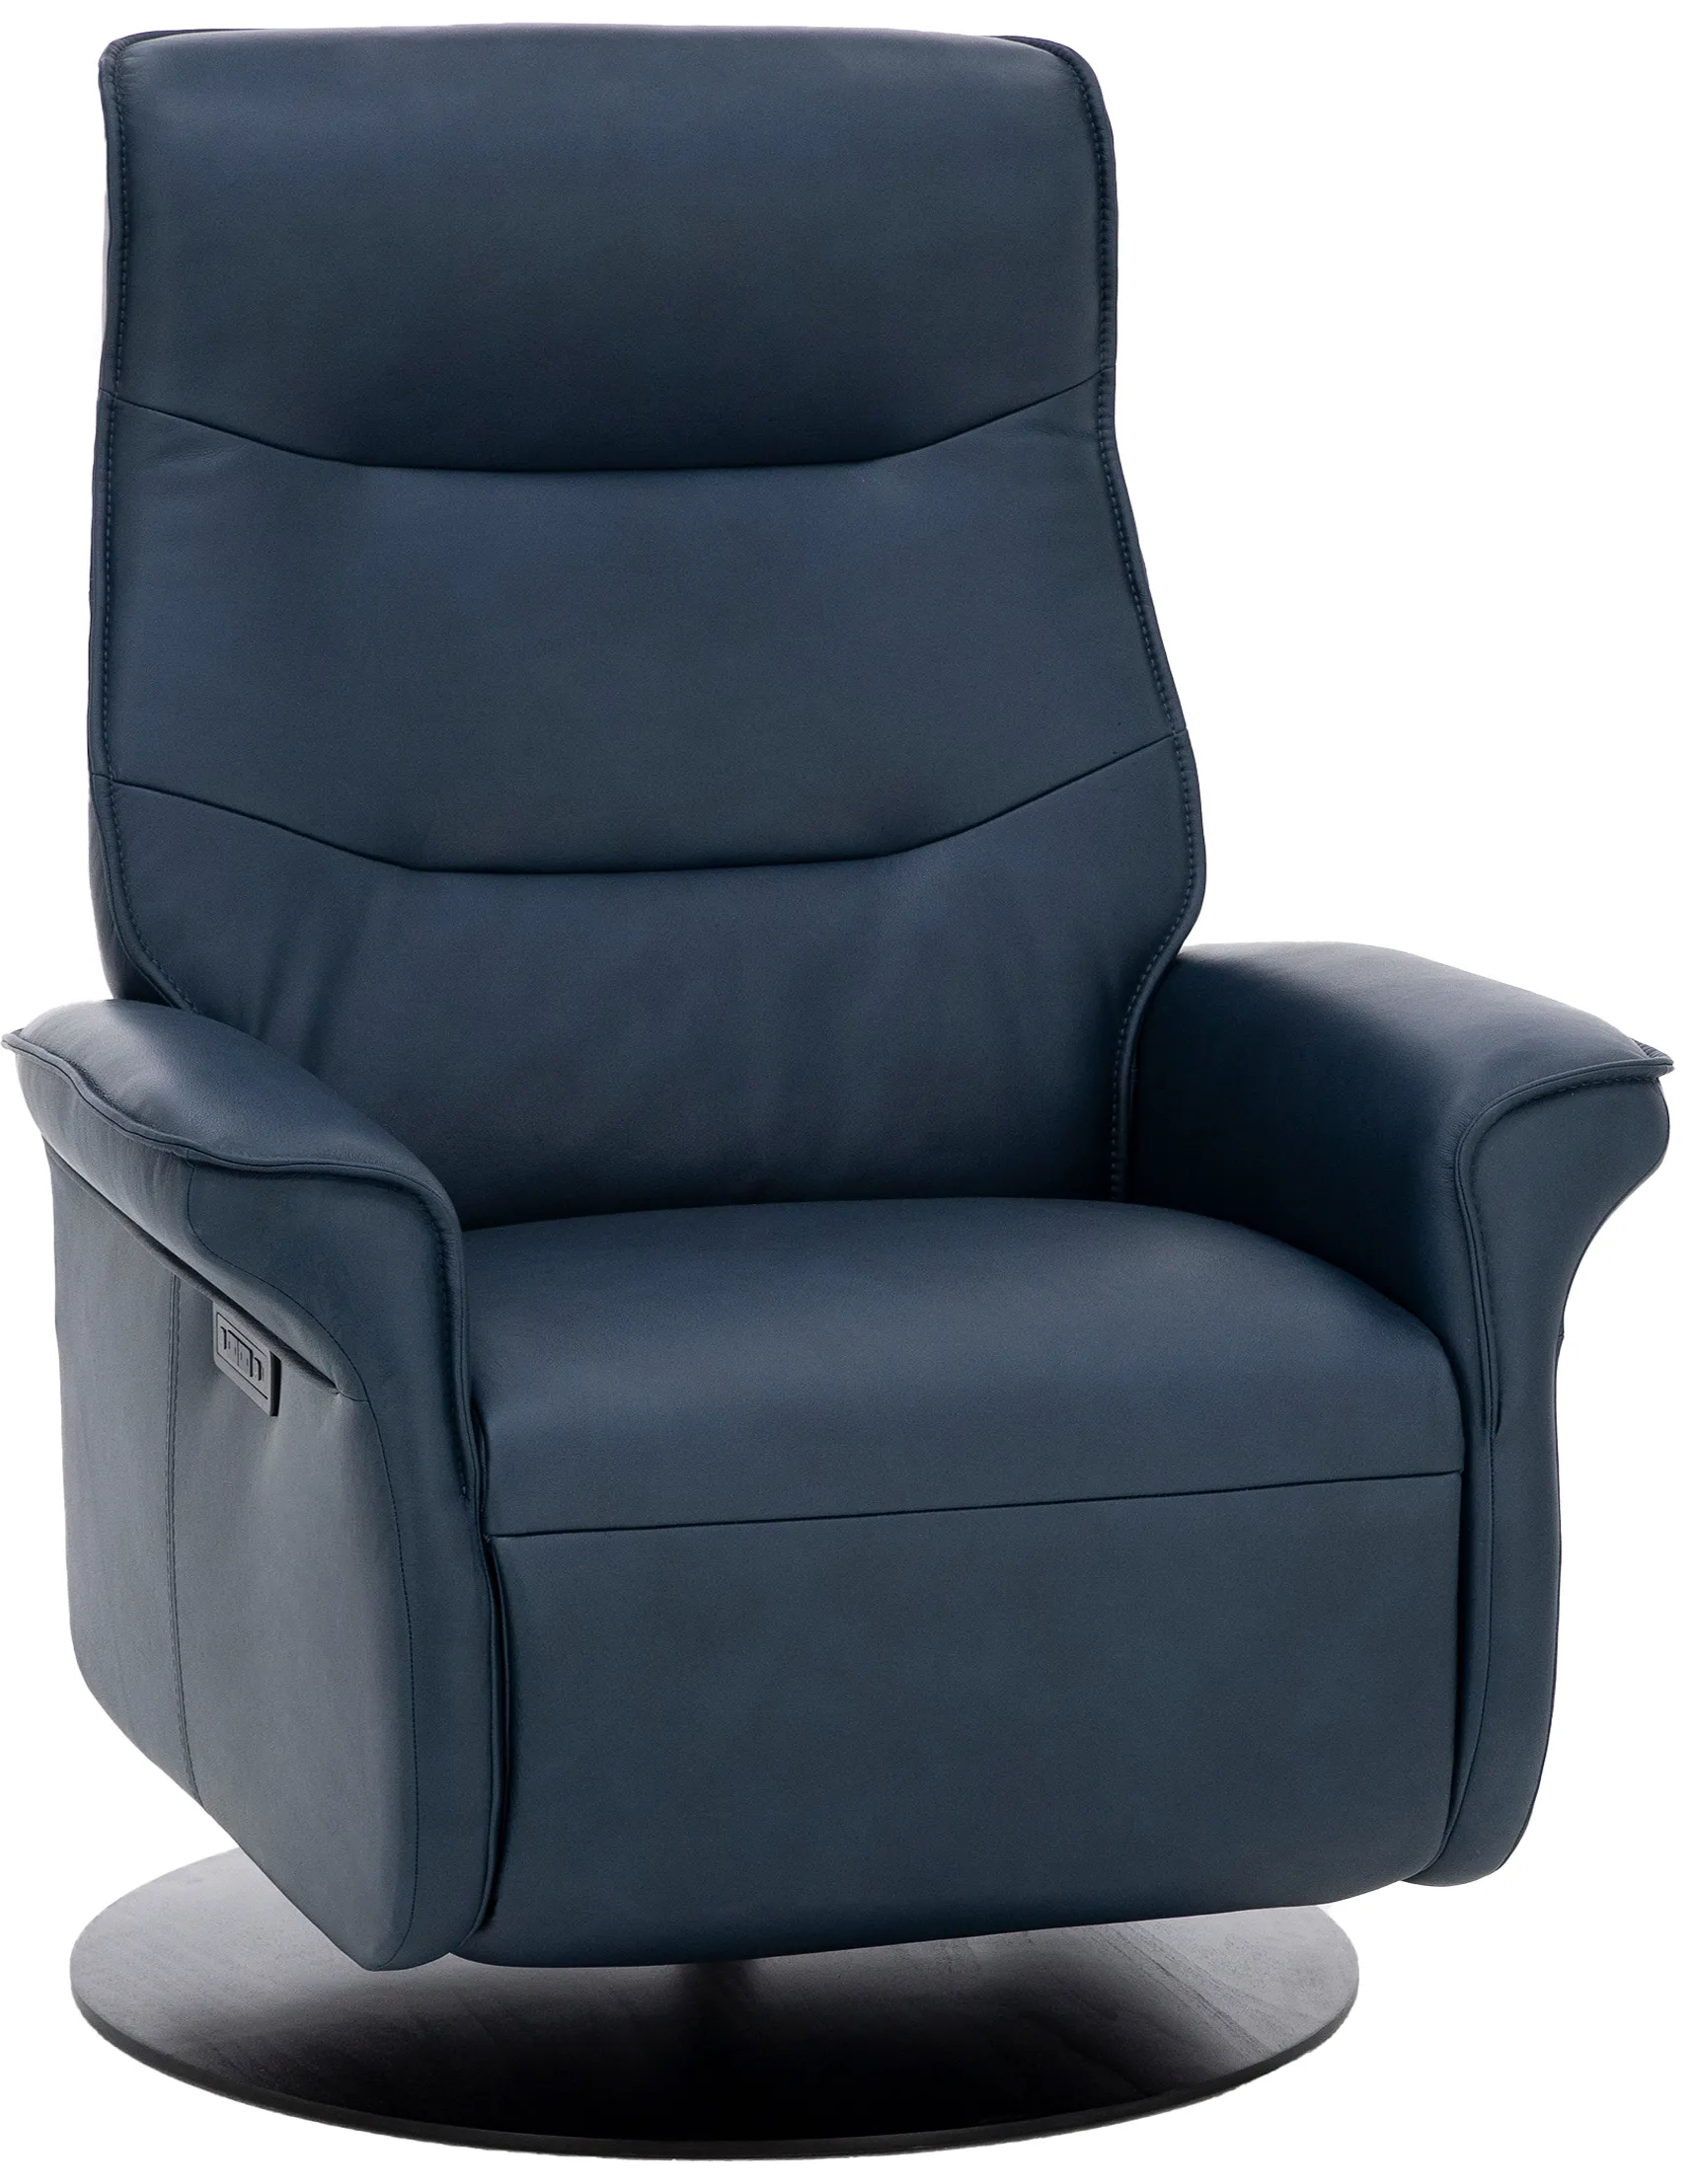 Vianna Leather Extra Large Power Swivel Recliner in Pacific